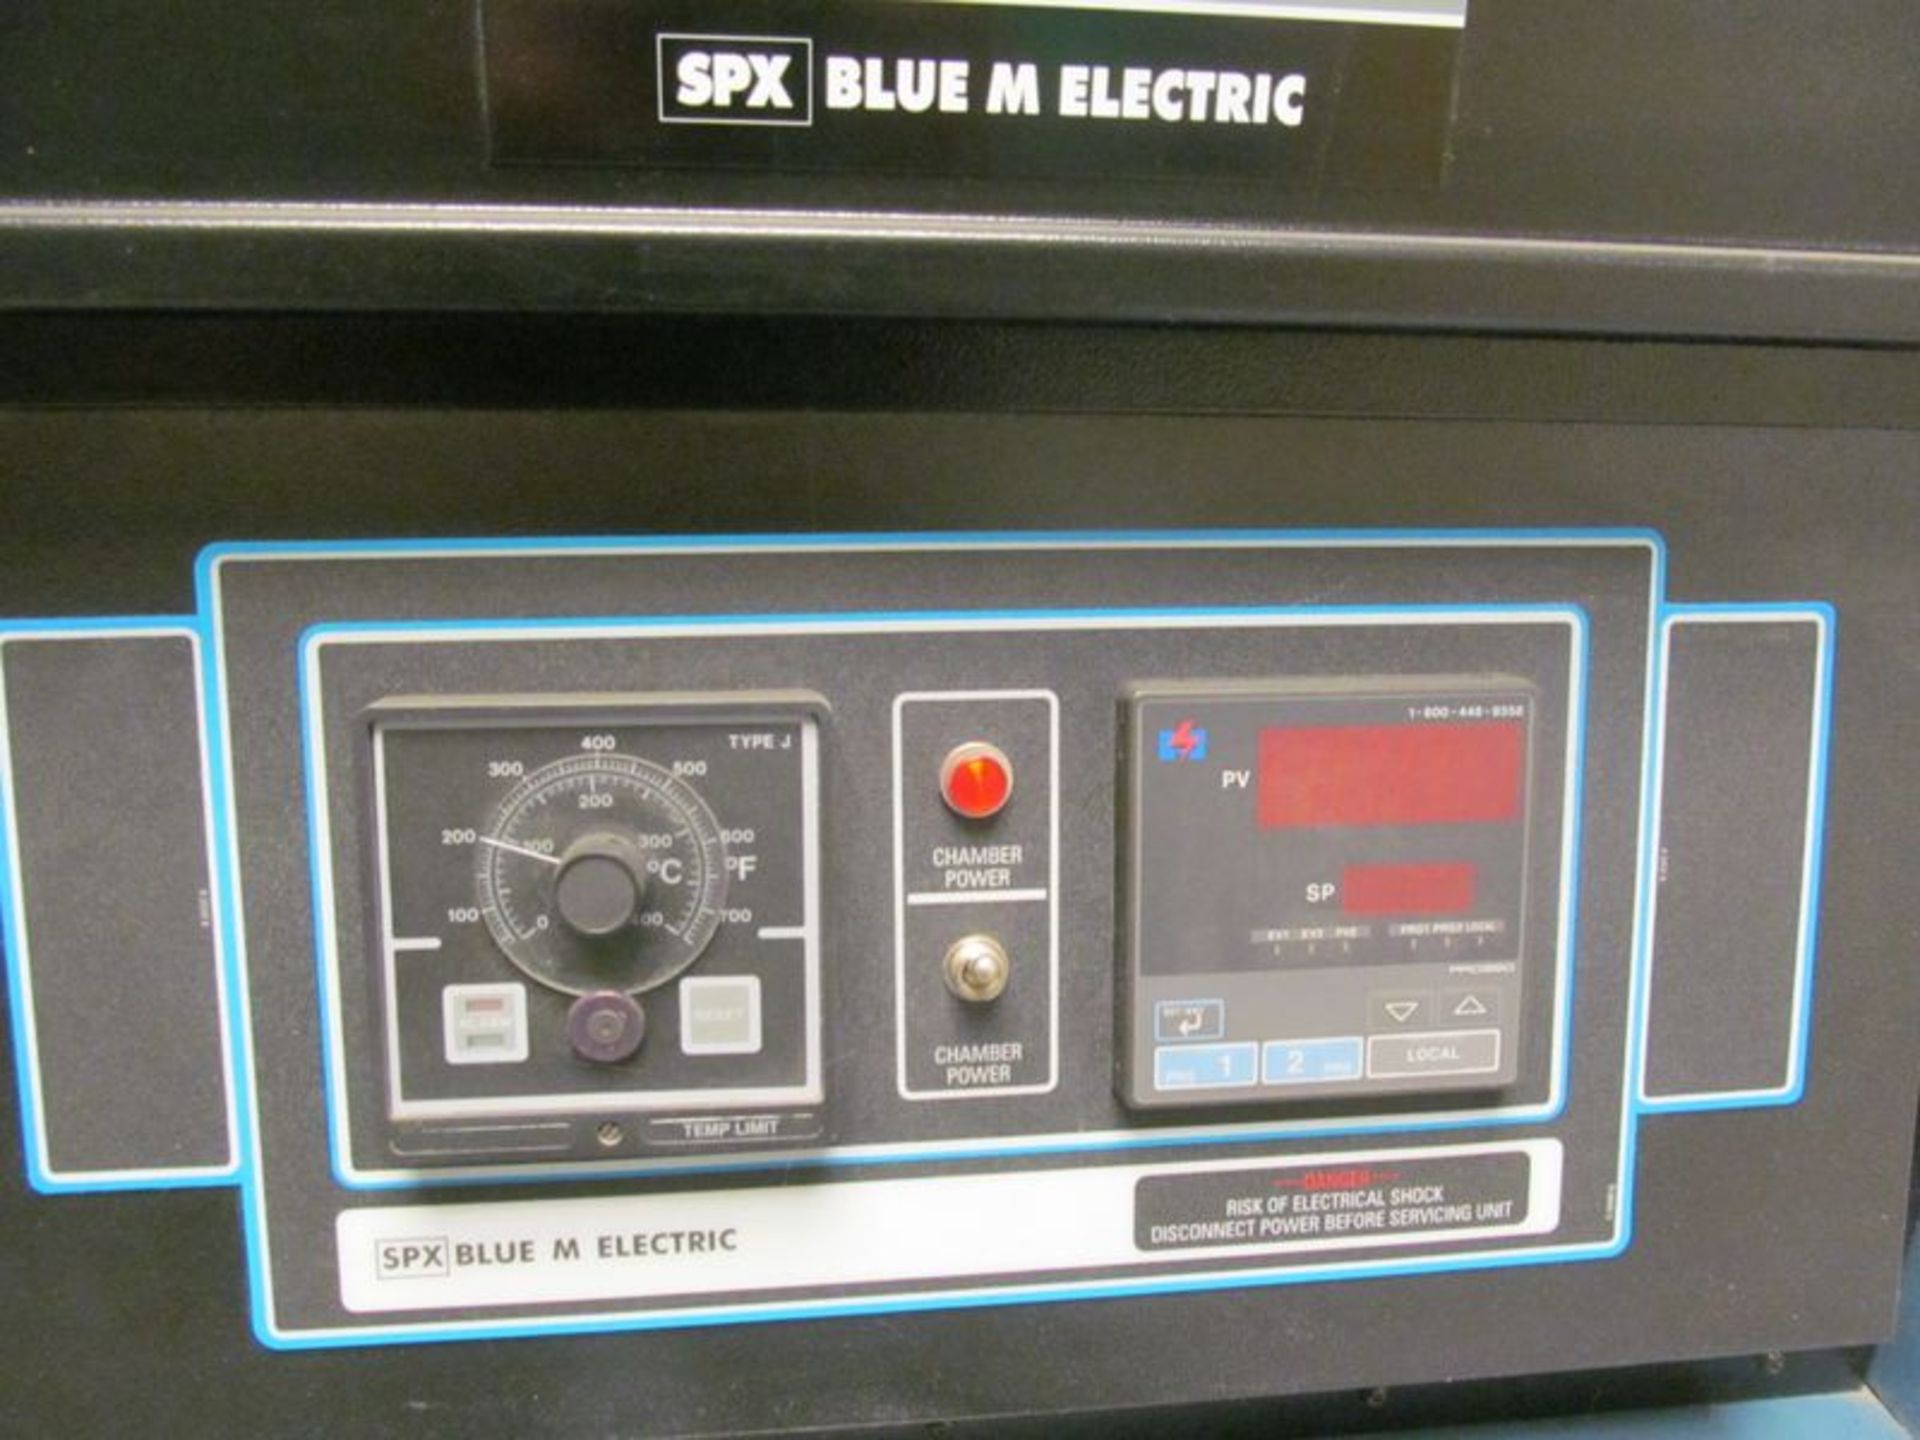 Blue M SPX evironmental chamber oven, M/N DCW-256-F-MP350, S/N 30239, temp rating 350 DegC, 240V, - Image 3 of 6